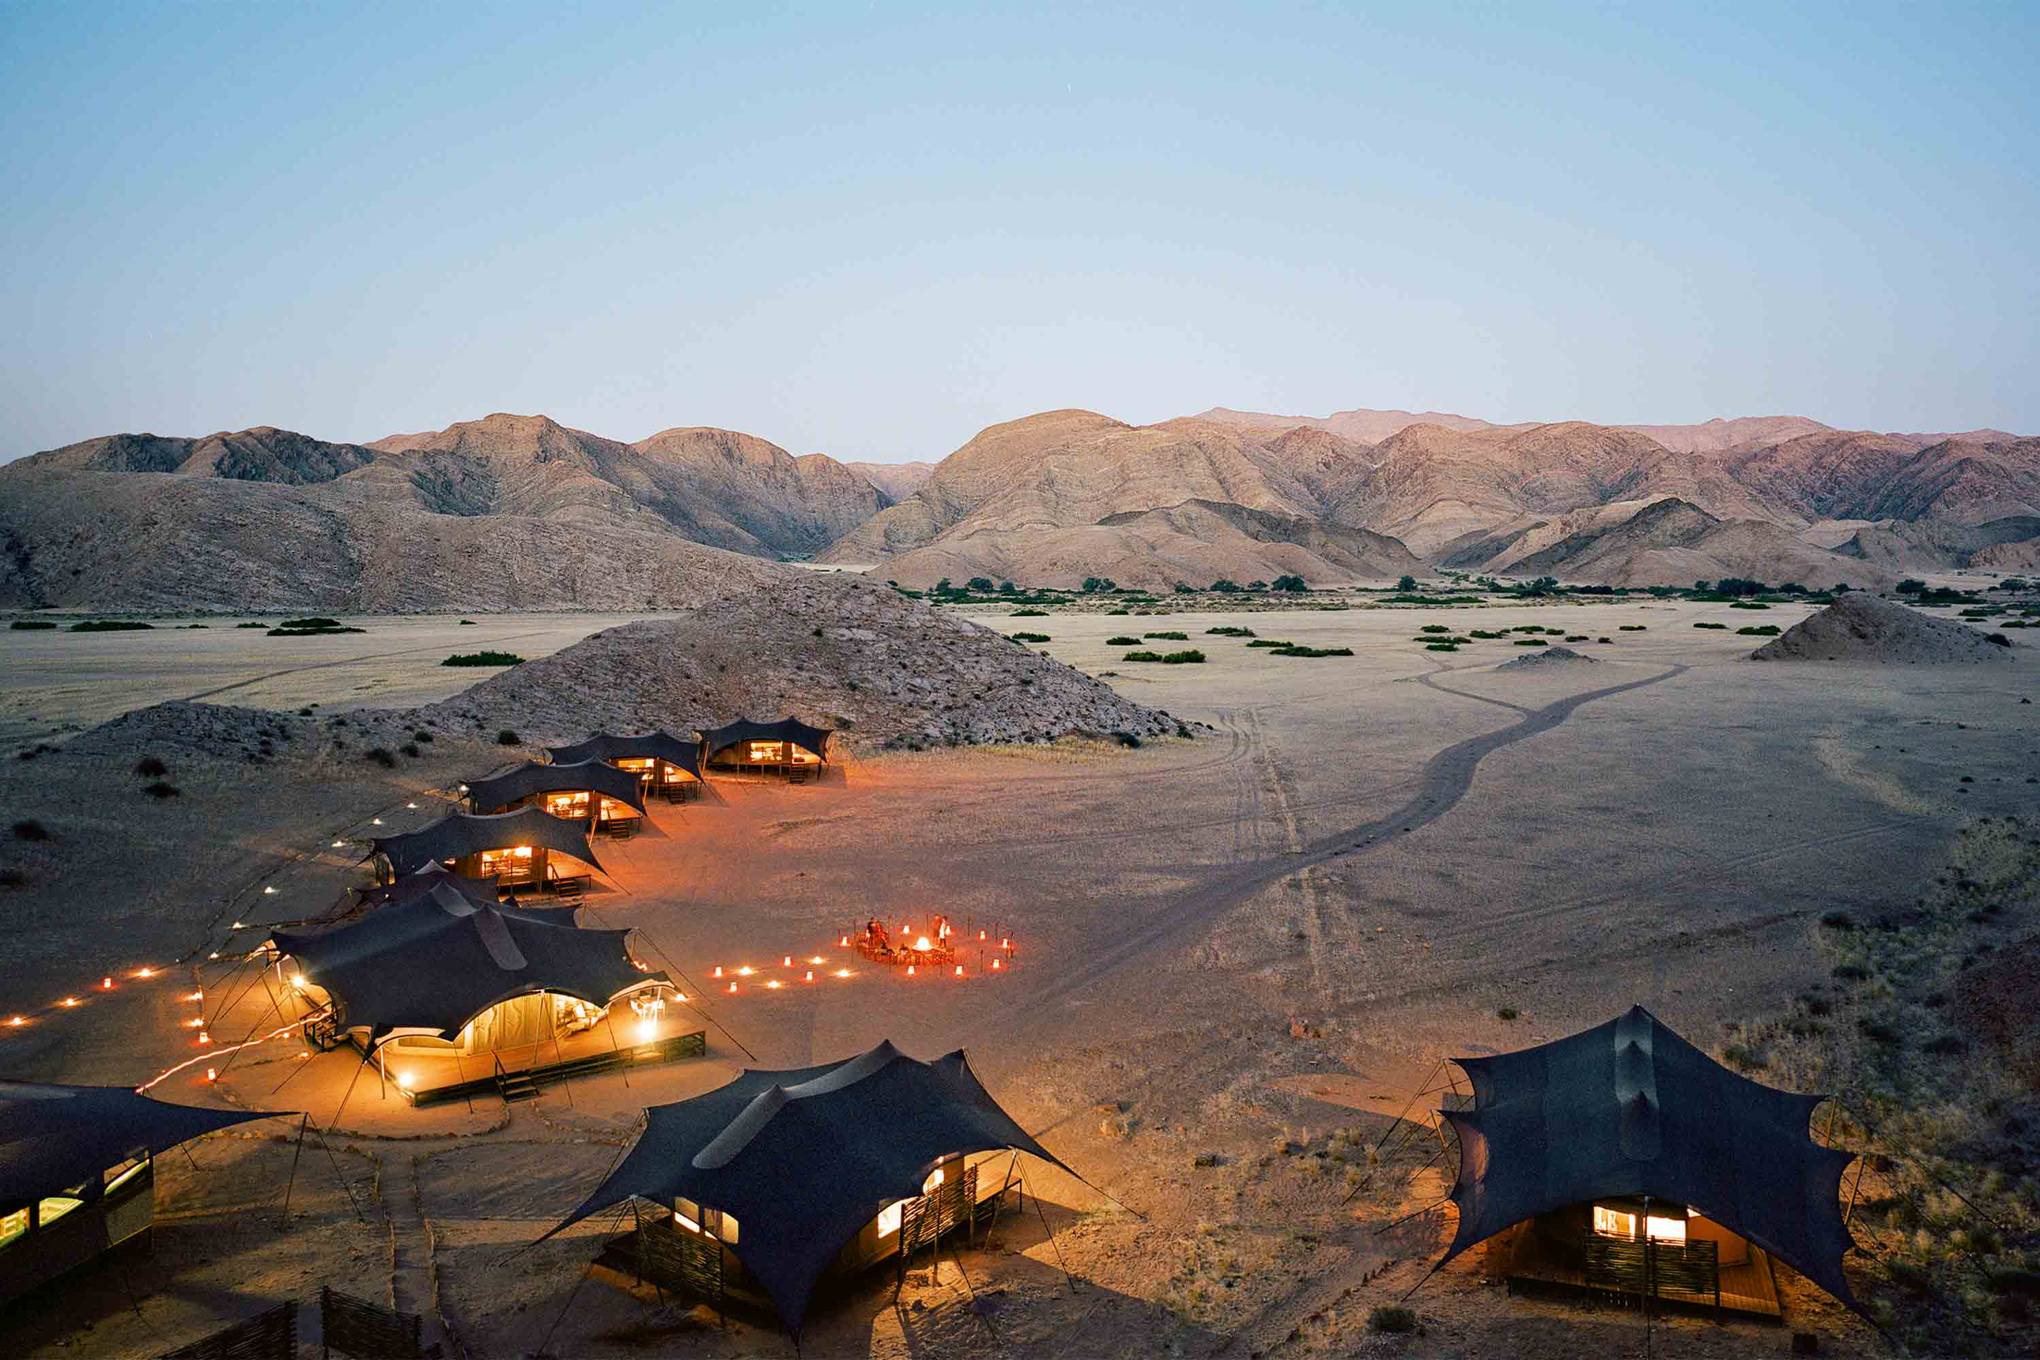 Vacation in Namibia; 5 things to do and see